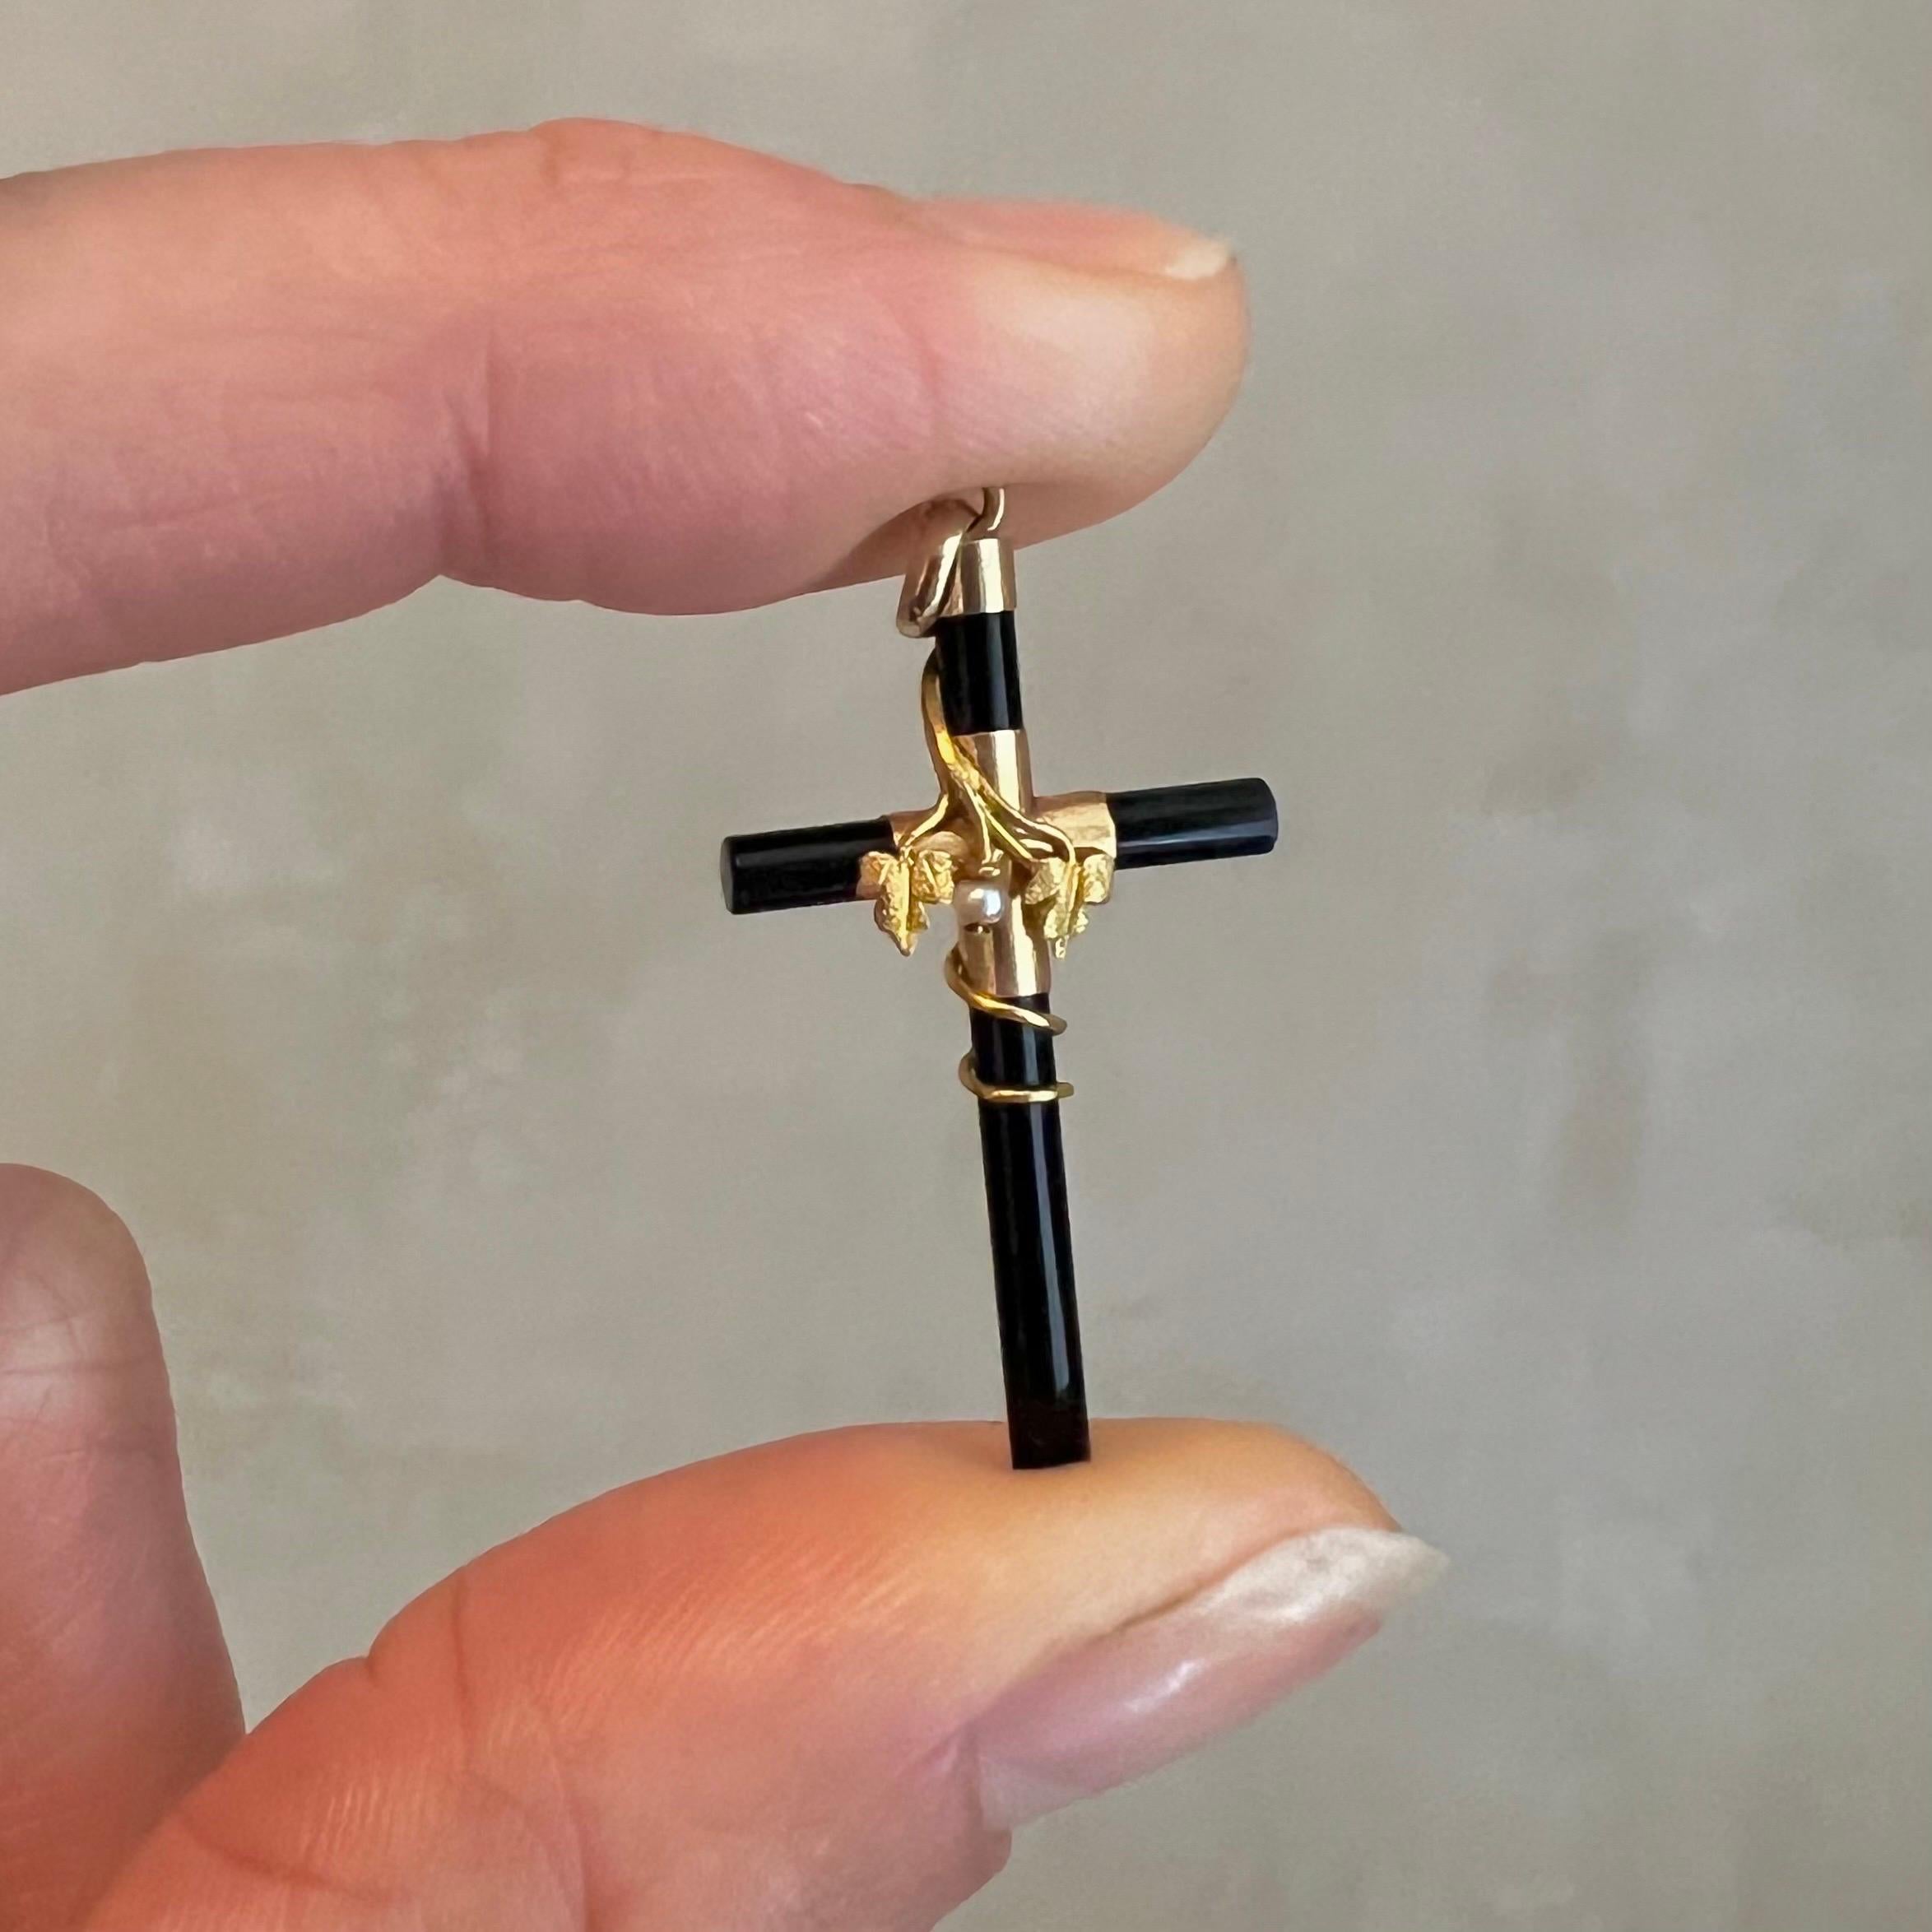 A Victorian onyx cross pendant set with a single seed pearl and adorned with a 14 karat gold floral design. This pendant is a captivating embodiment of the elegance and symbolism of the Victorian era. Crafted during the 19th century, this pendant